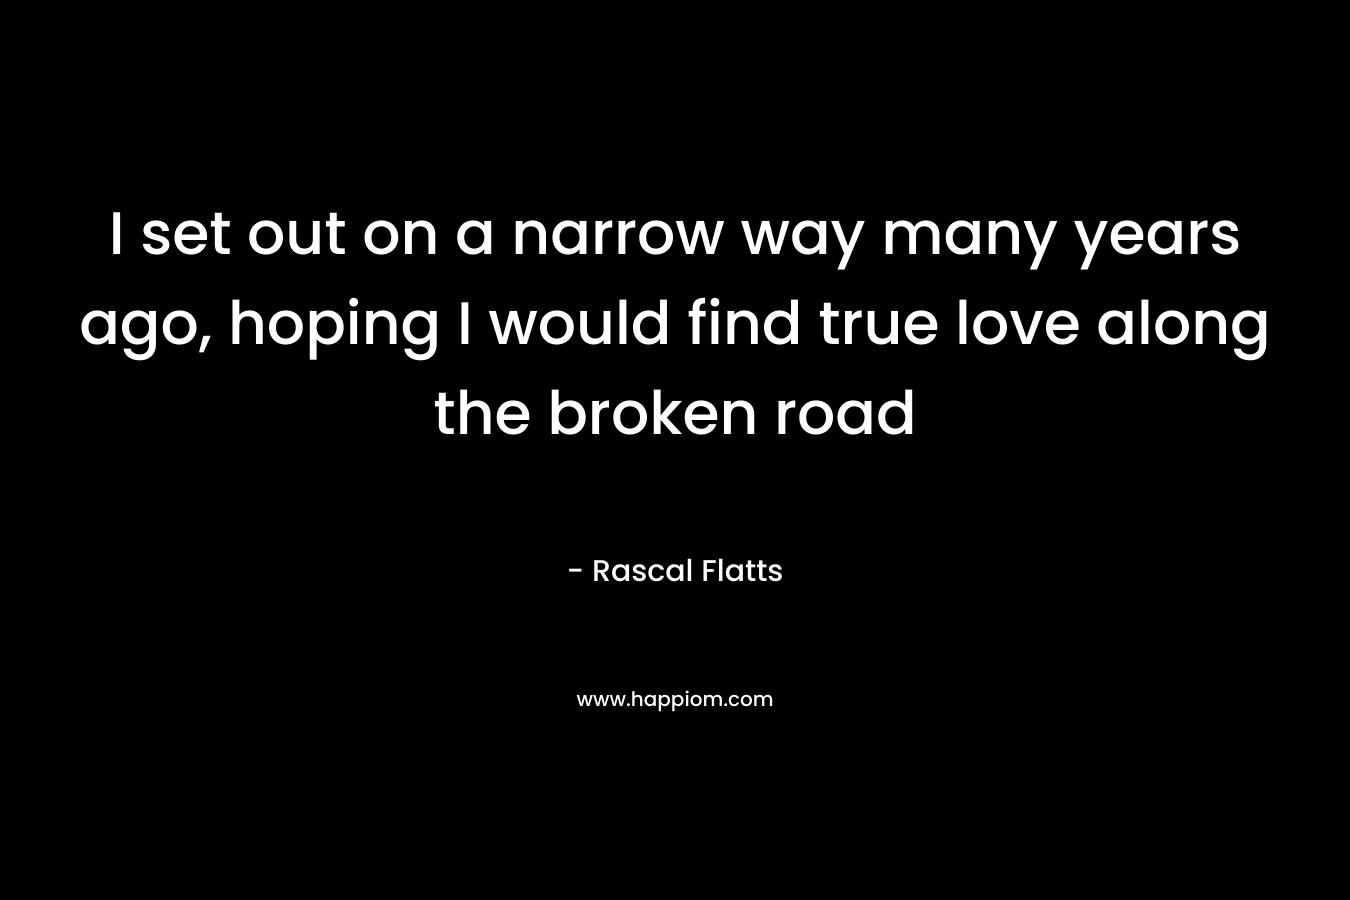 I set out on a narrow way many years ago, hoping I would find true love along the broken road